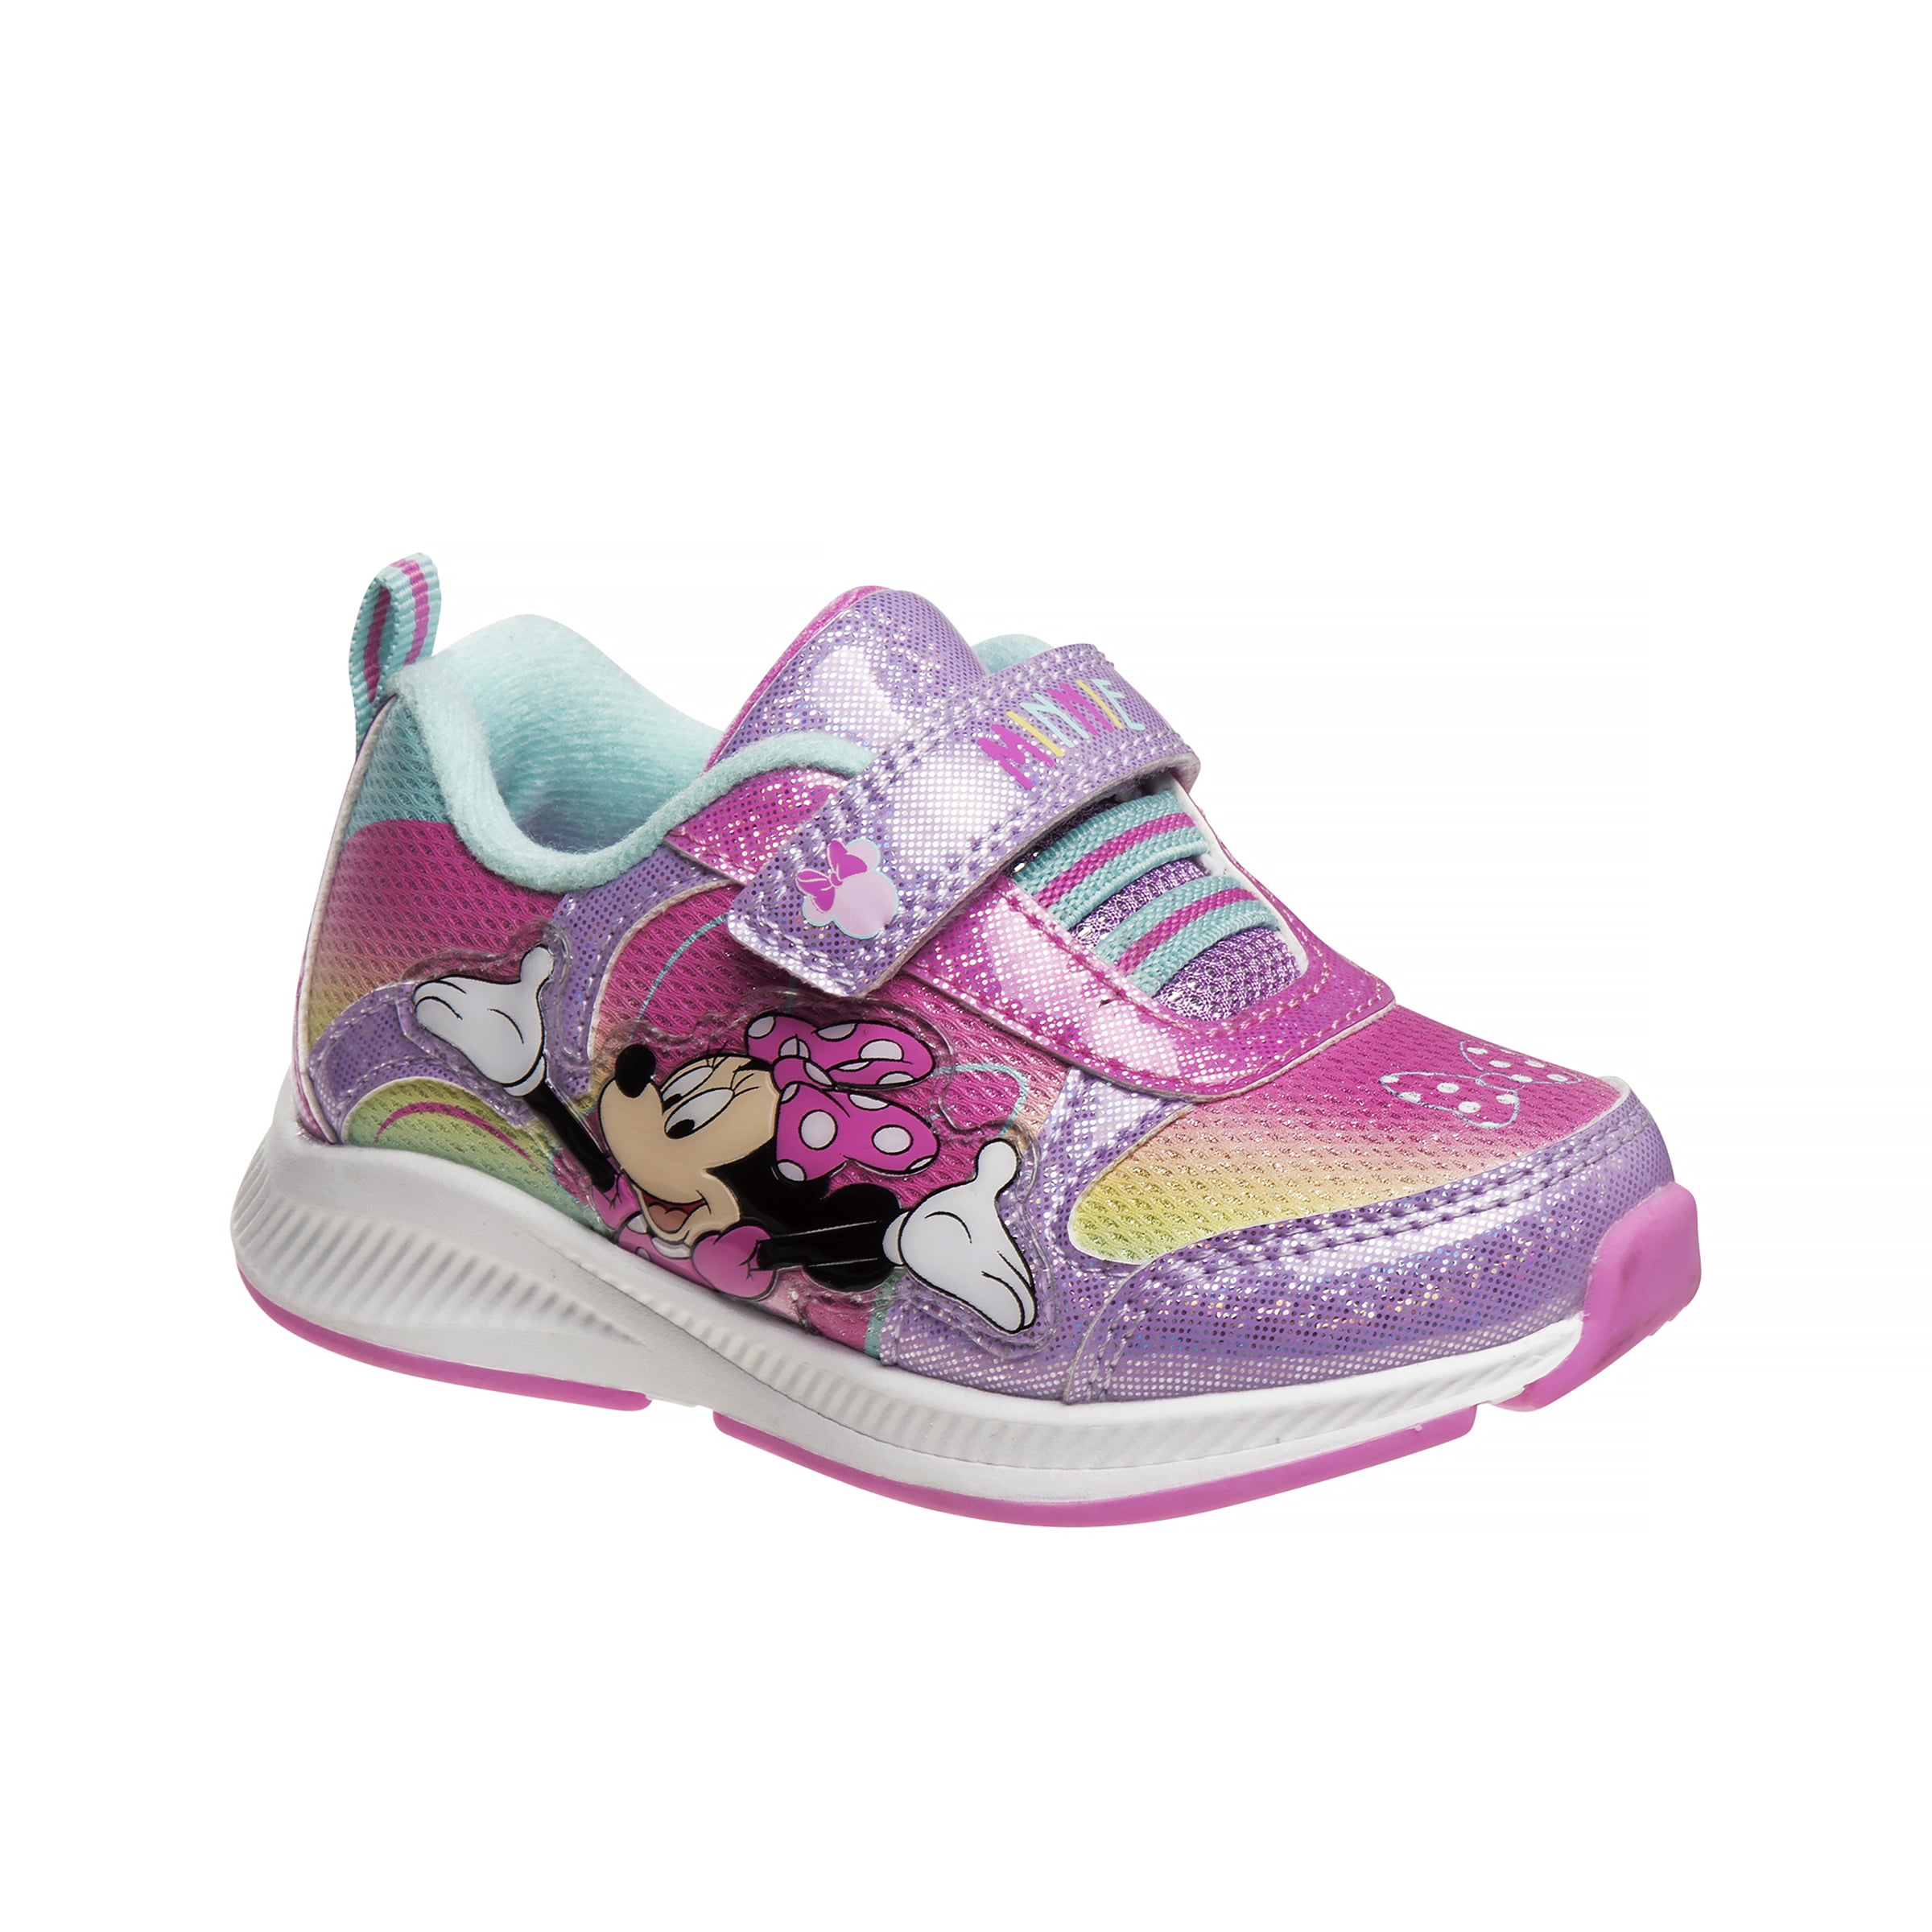 Minnie Mouse Toddler Minnie Sneakers - Walmart.com